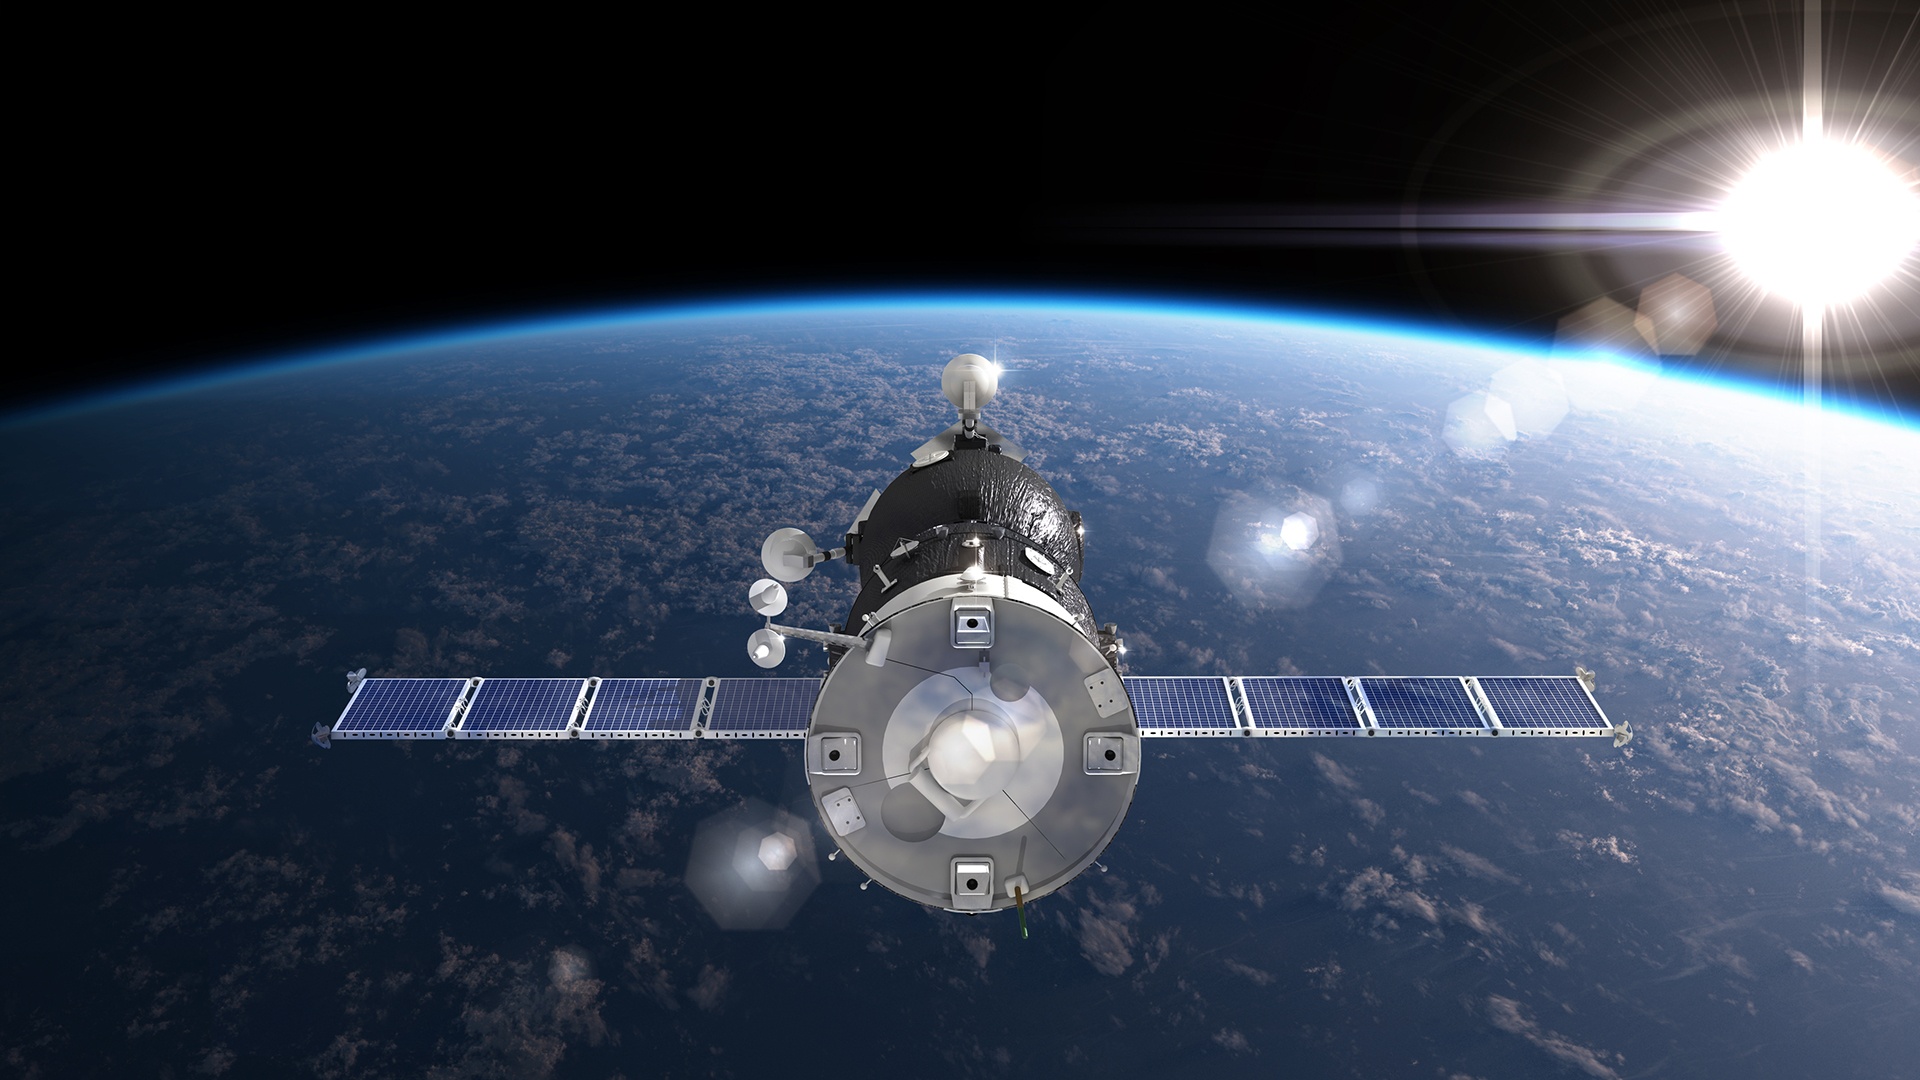 Crossing borders: connecting satellites and mobile phones in the era of new mobile devices